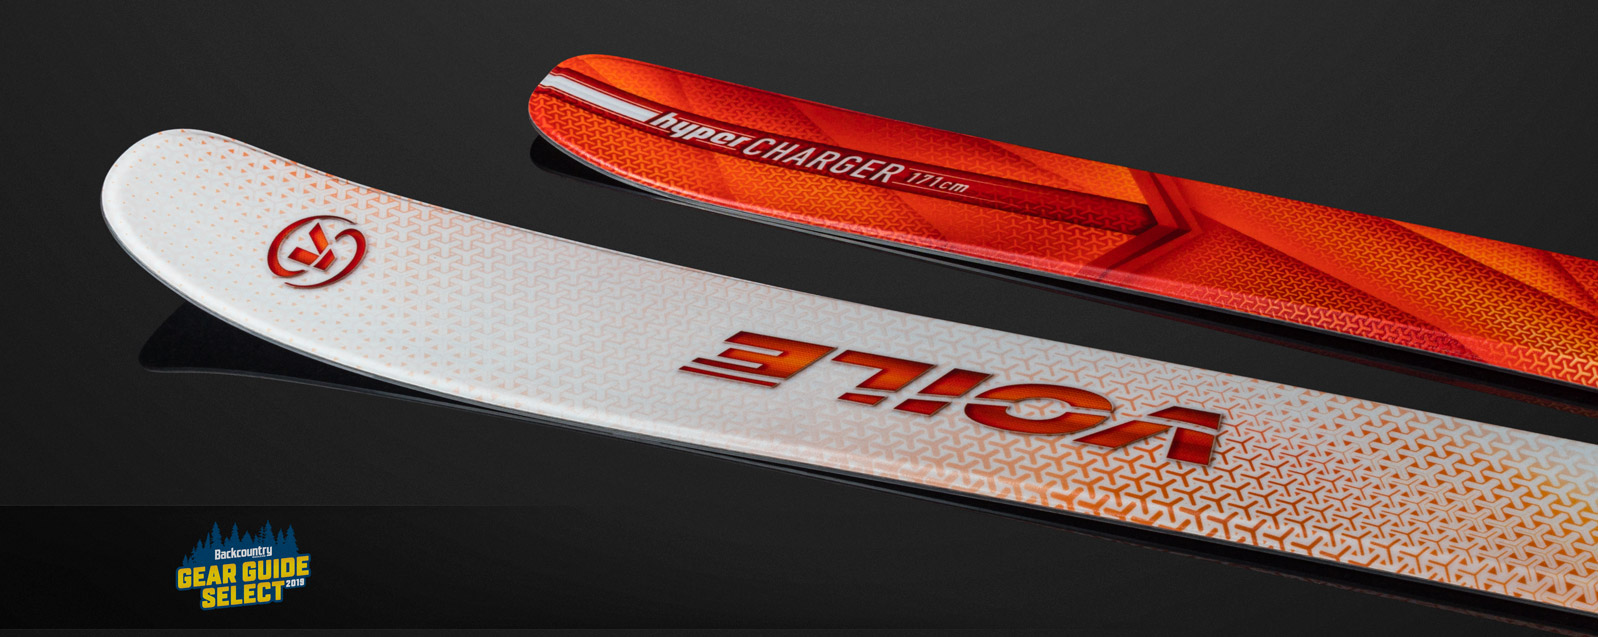 Voile HyperCharger Skis - Discontinued Graphics